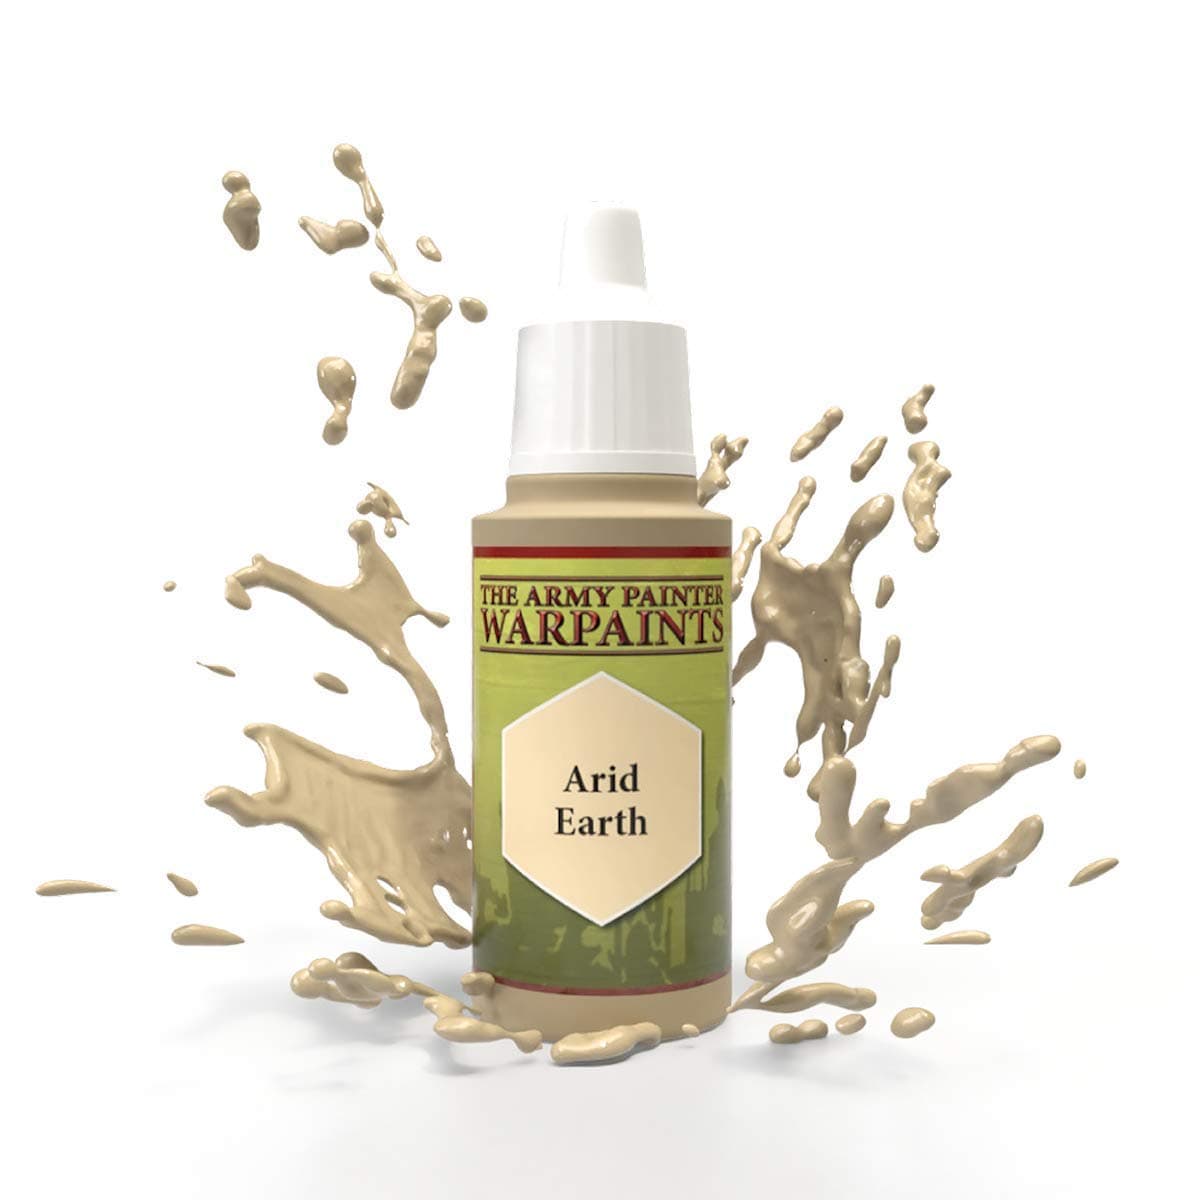 The Army Painter Accessories The Army Painter Warpaints: Arid Earth 18ml